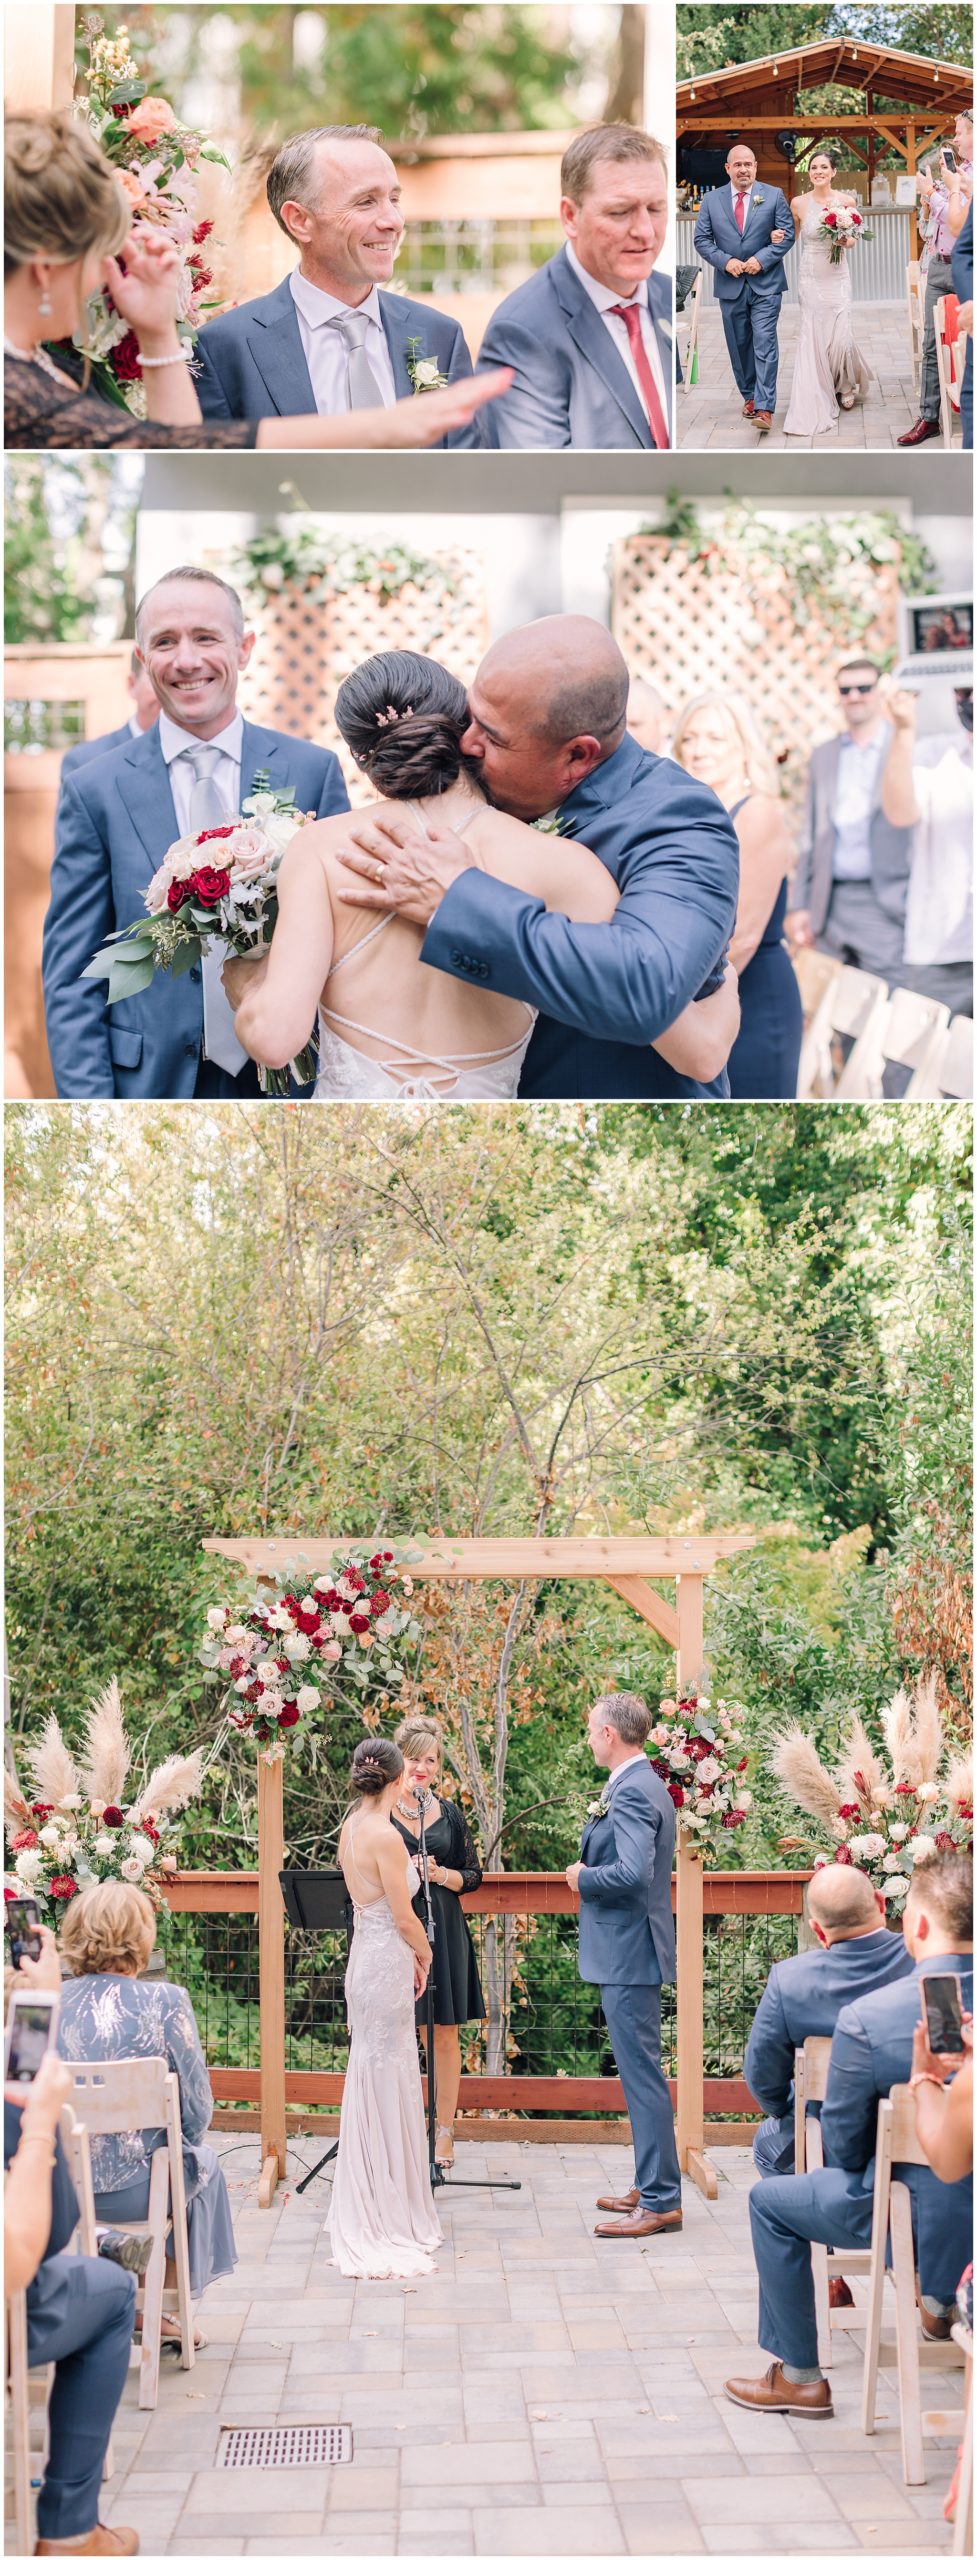 Courtney Stockton Photography, By your side events, marin wedding photographer, napa wedding photographer, sonoma wedding photographer, san francisco wedding photographer